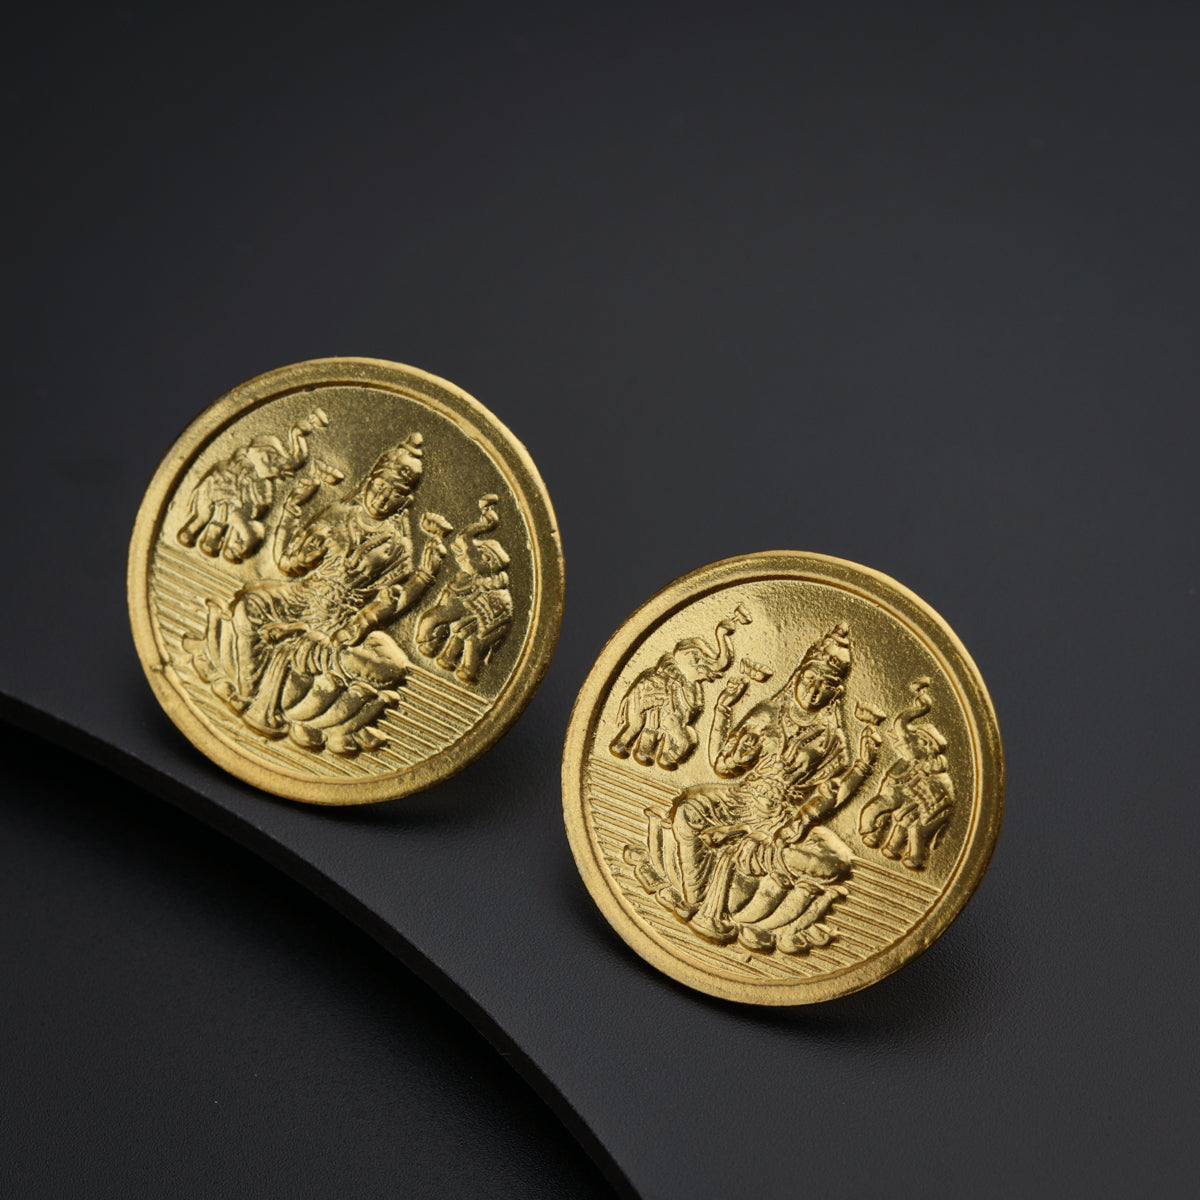 a close up of two gold coins on a black surface